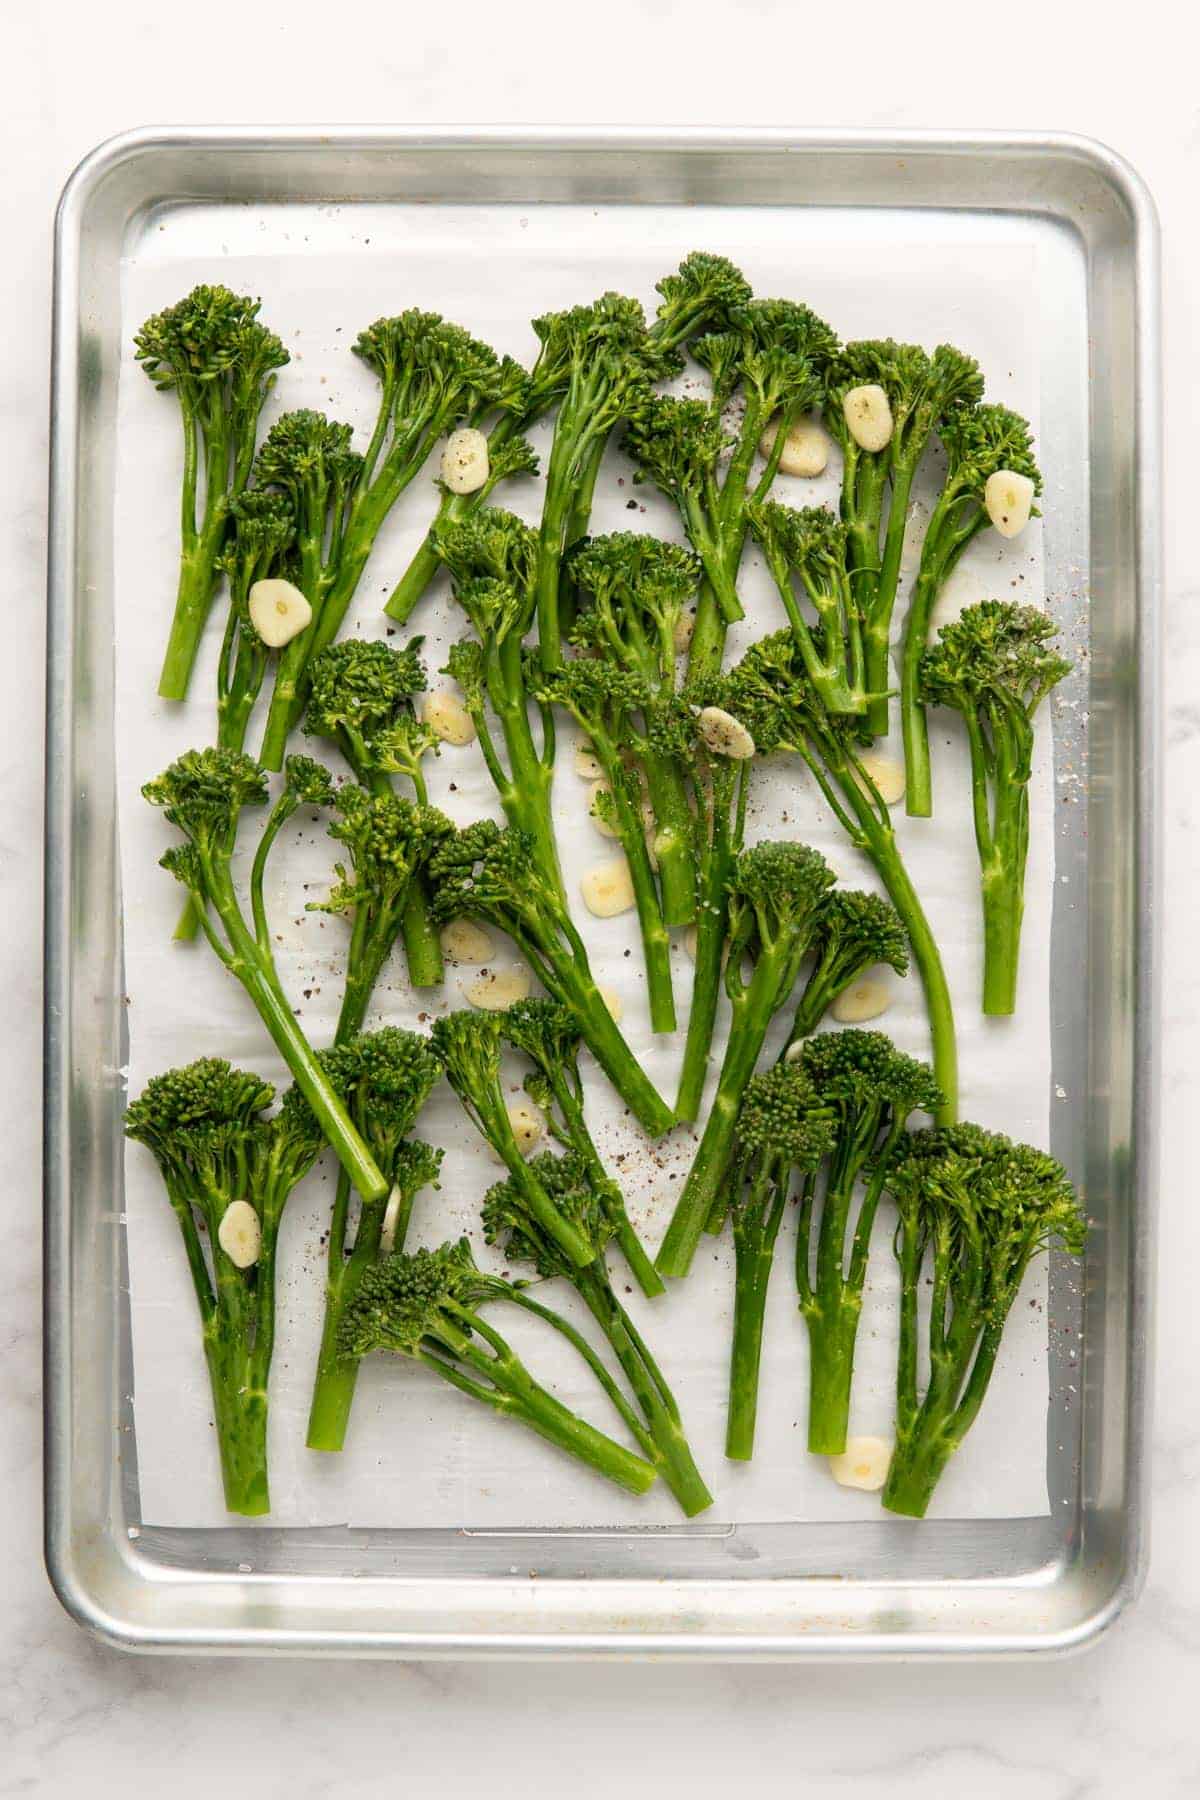 Uncooked tenderstem broccoli with garlic slices and seasoned with salt and pepper on an oven tray.